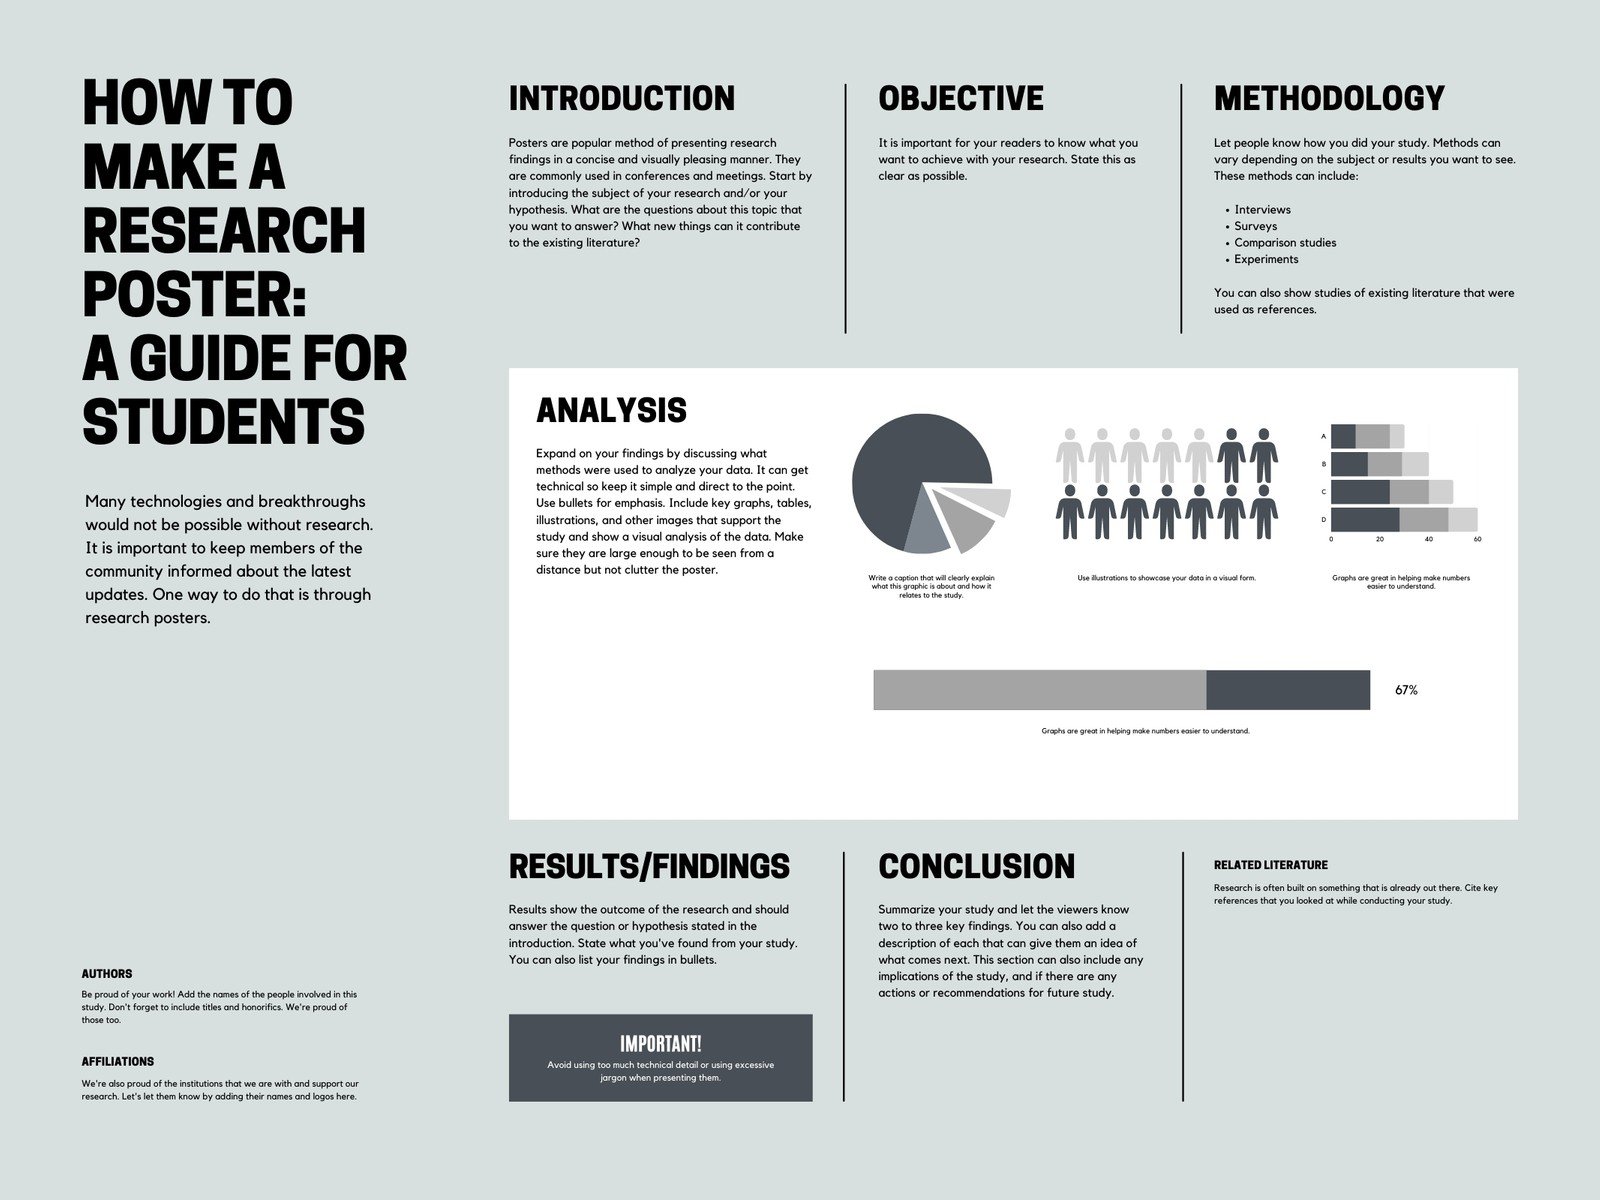 Customize 21+ Research Posters Templates Online - Canva Throughout Research Study Flyer Template